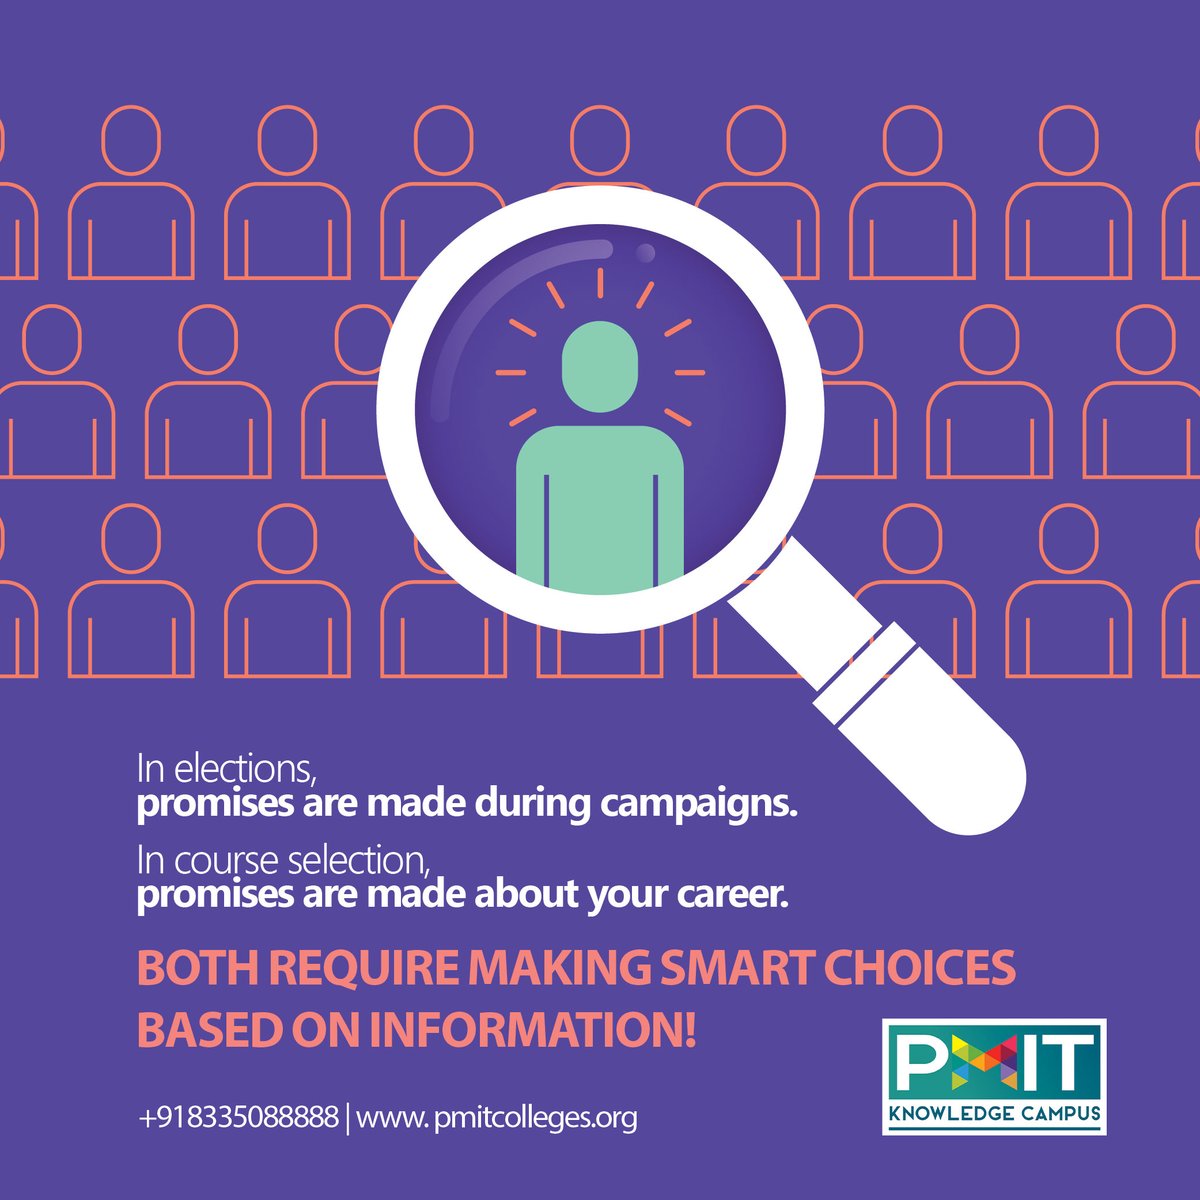 From speeches to course outlines, promises are everywhere. Choose wisely, as your future depends on it.

#futureelections #InformedChoices #promisesmatter #careerpromises #choosewisely #informedvoters #FuturePlans #electionpromises #PMIT #pmitknowledgecampus